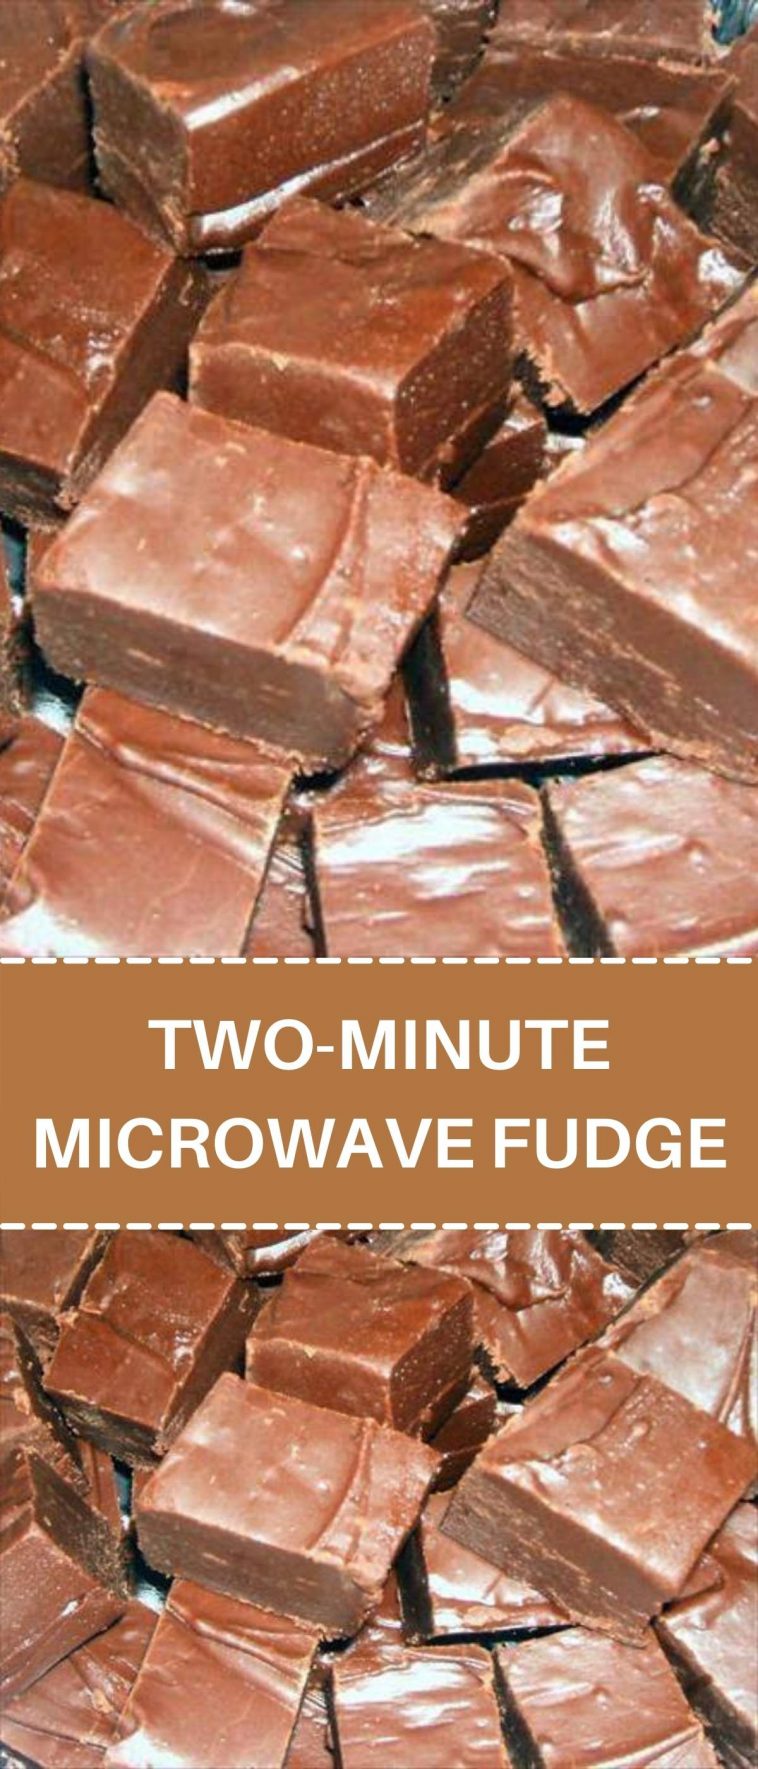 TWO-MINUTE MICROWAVE FUDGE, delicious!